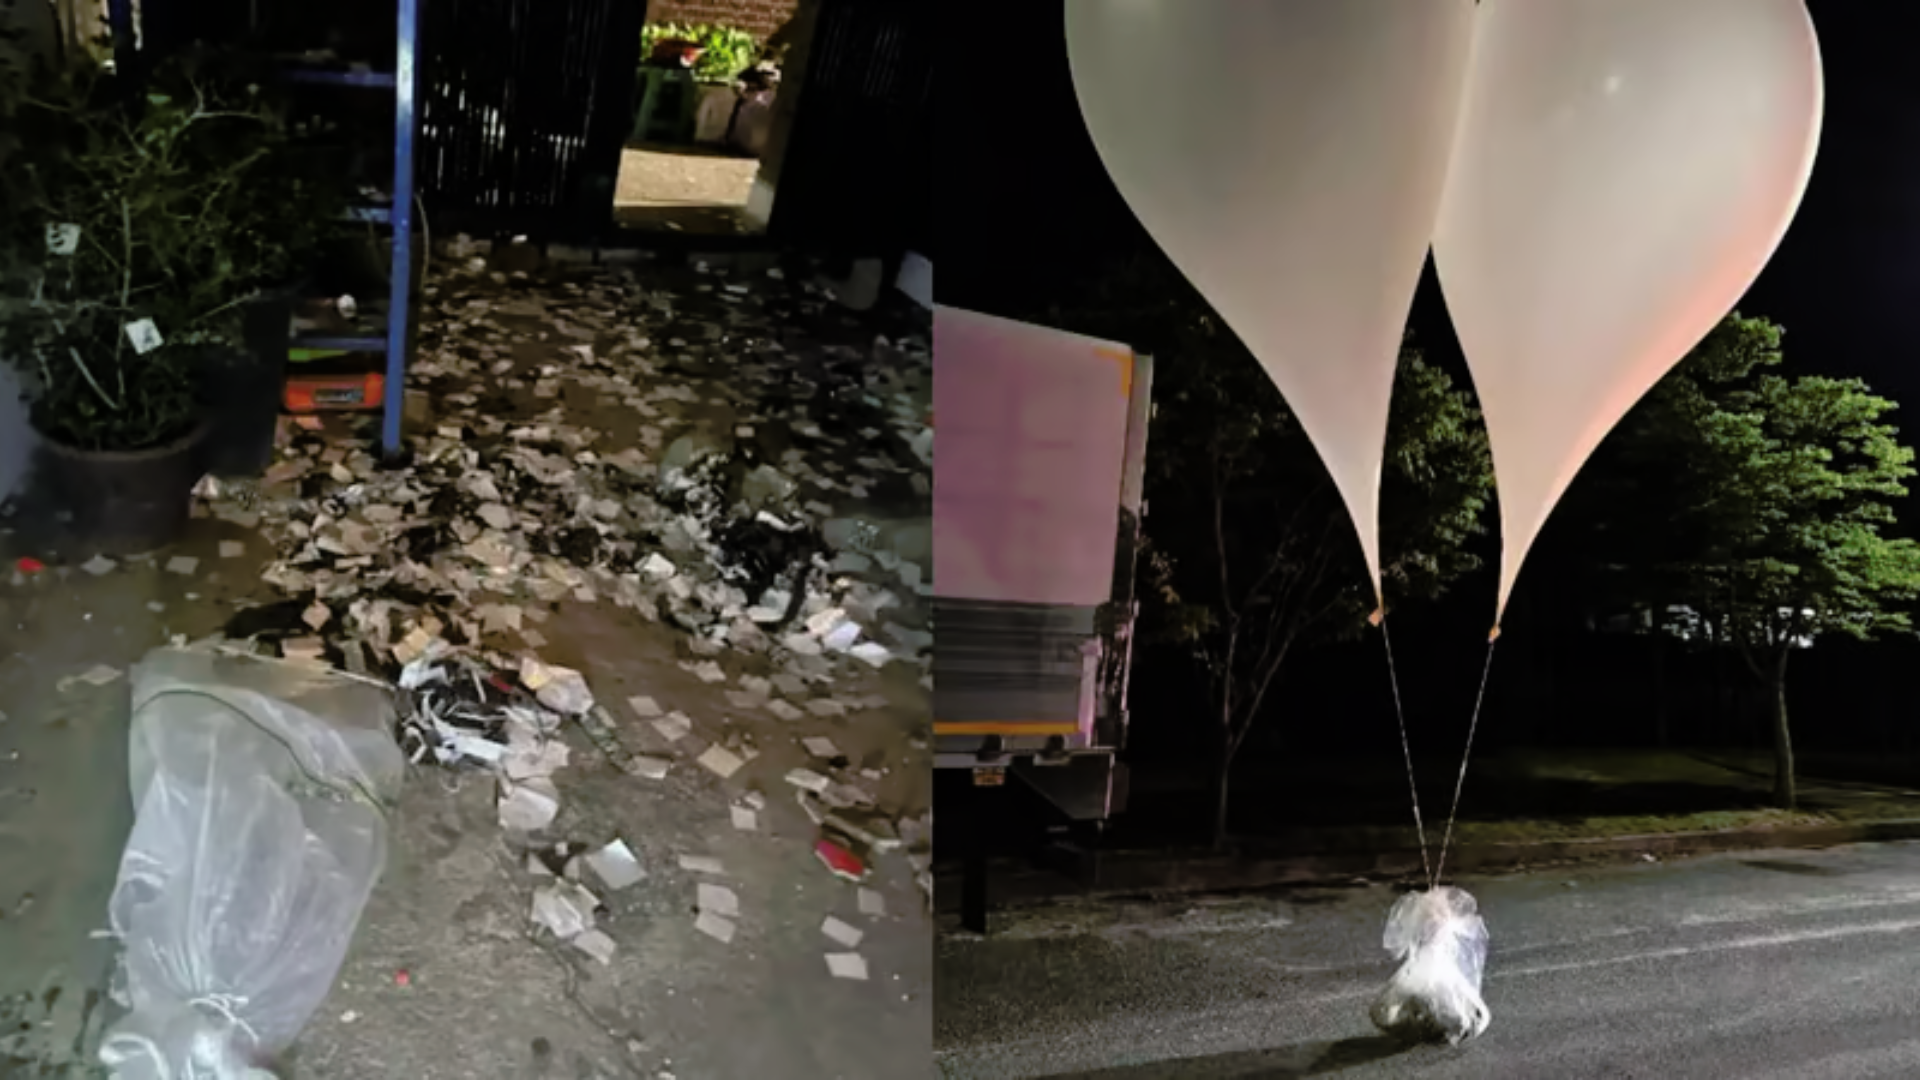 North Korea Dispatches Large Balloons Laden With ‘Garbage’ Into South Korea